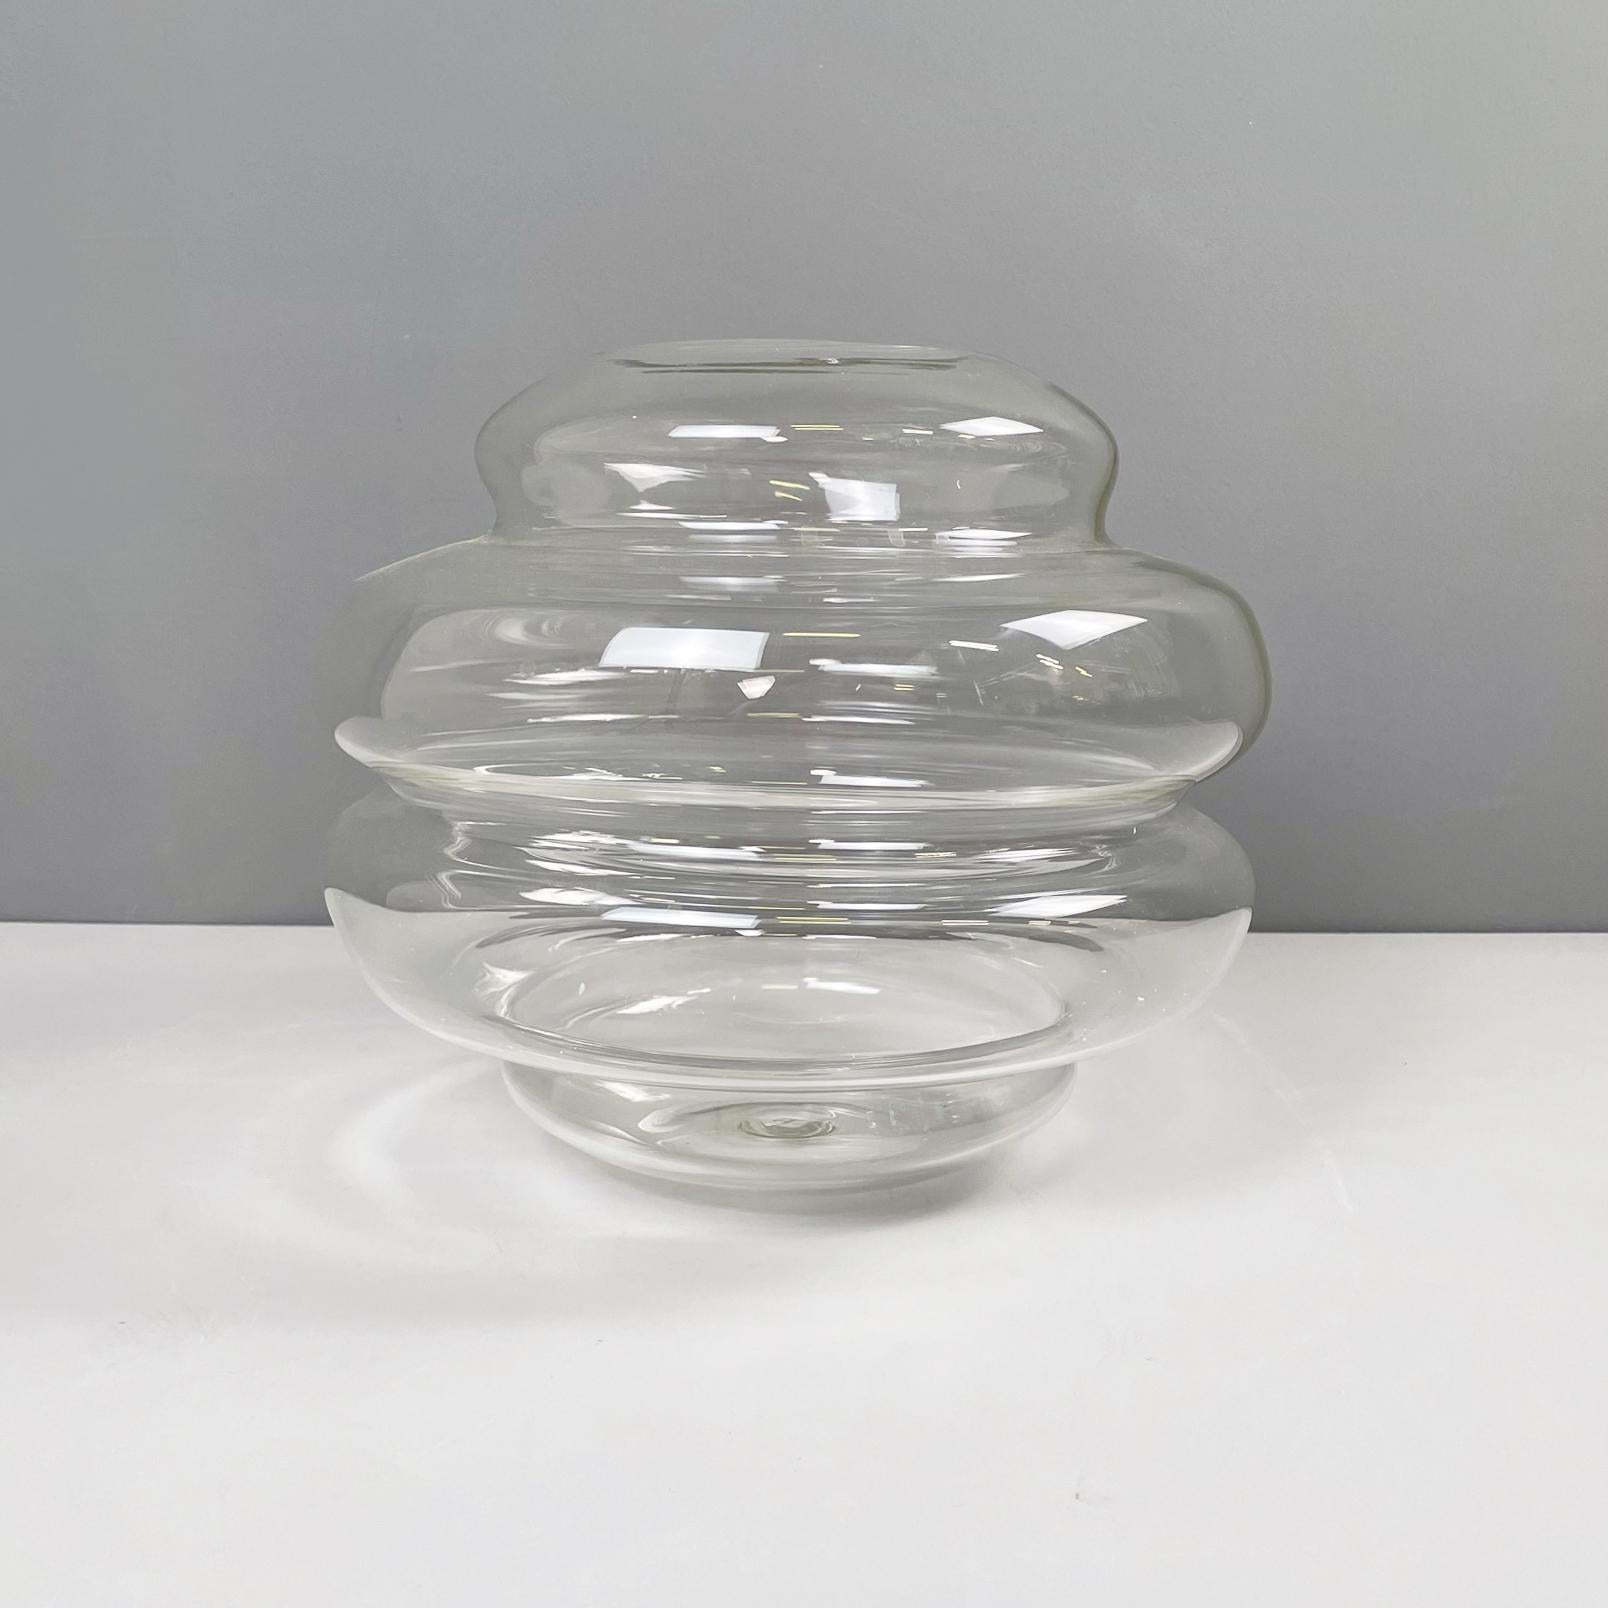 Italian modern Glass vase with round shape by Roberto Faccioli, 1990s
Round base vase in finely handcrafted glass. The structure tends to narrow towards the extremes and widen in the centre, with round shape.
Designed and produced by Roberto